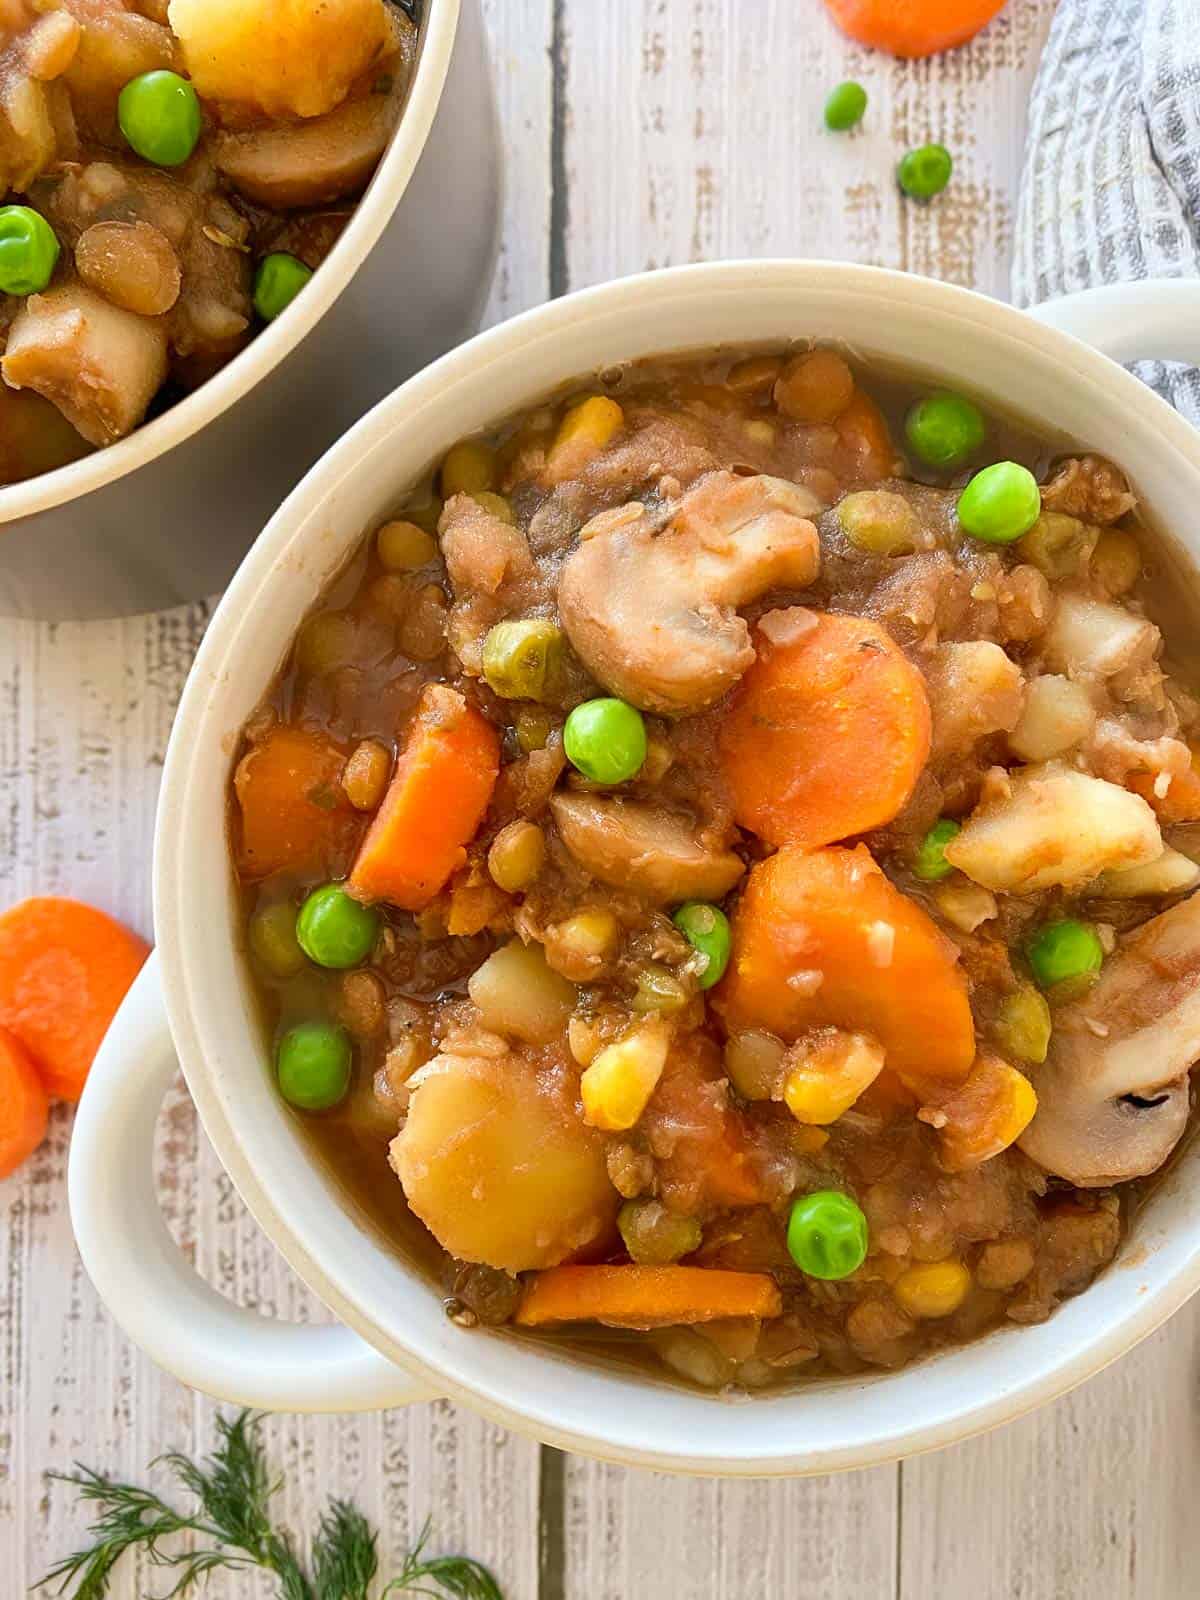 Close up of bowl of stew with mushrooms, carrots, peas, corn, lentils and potatoes.